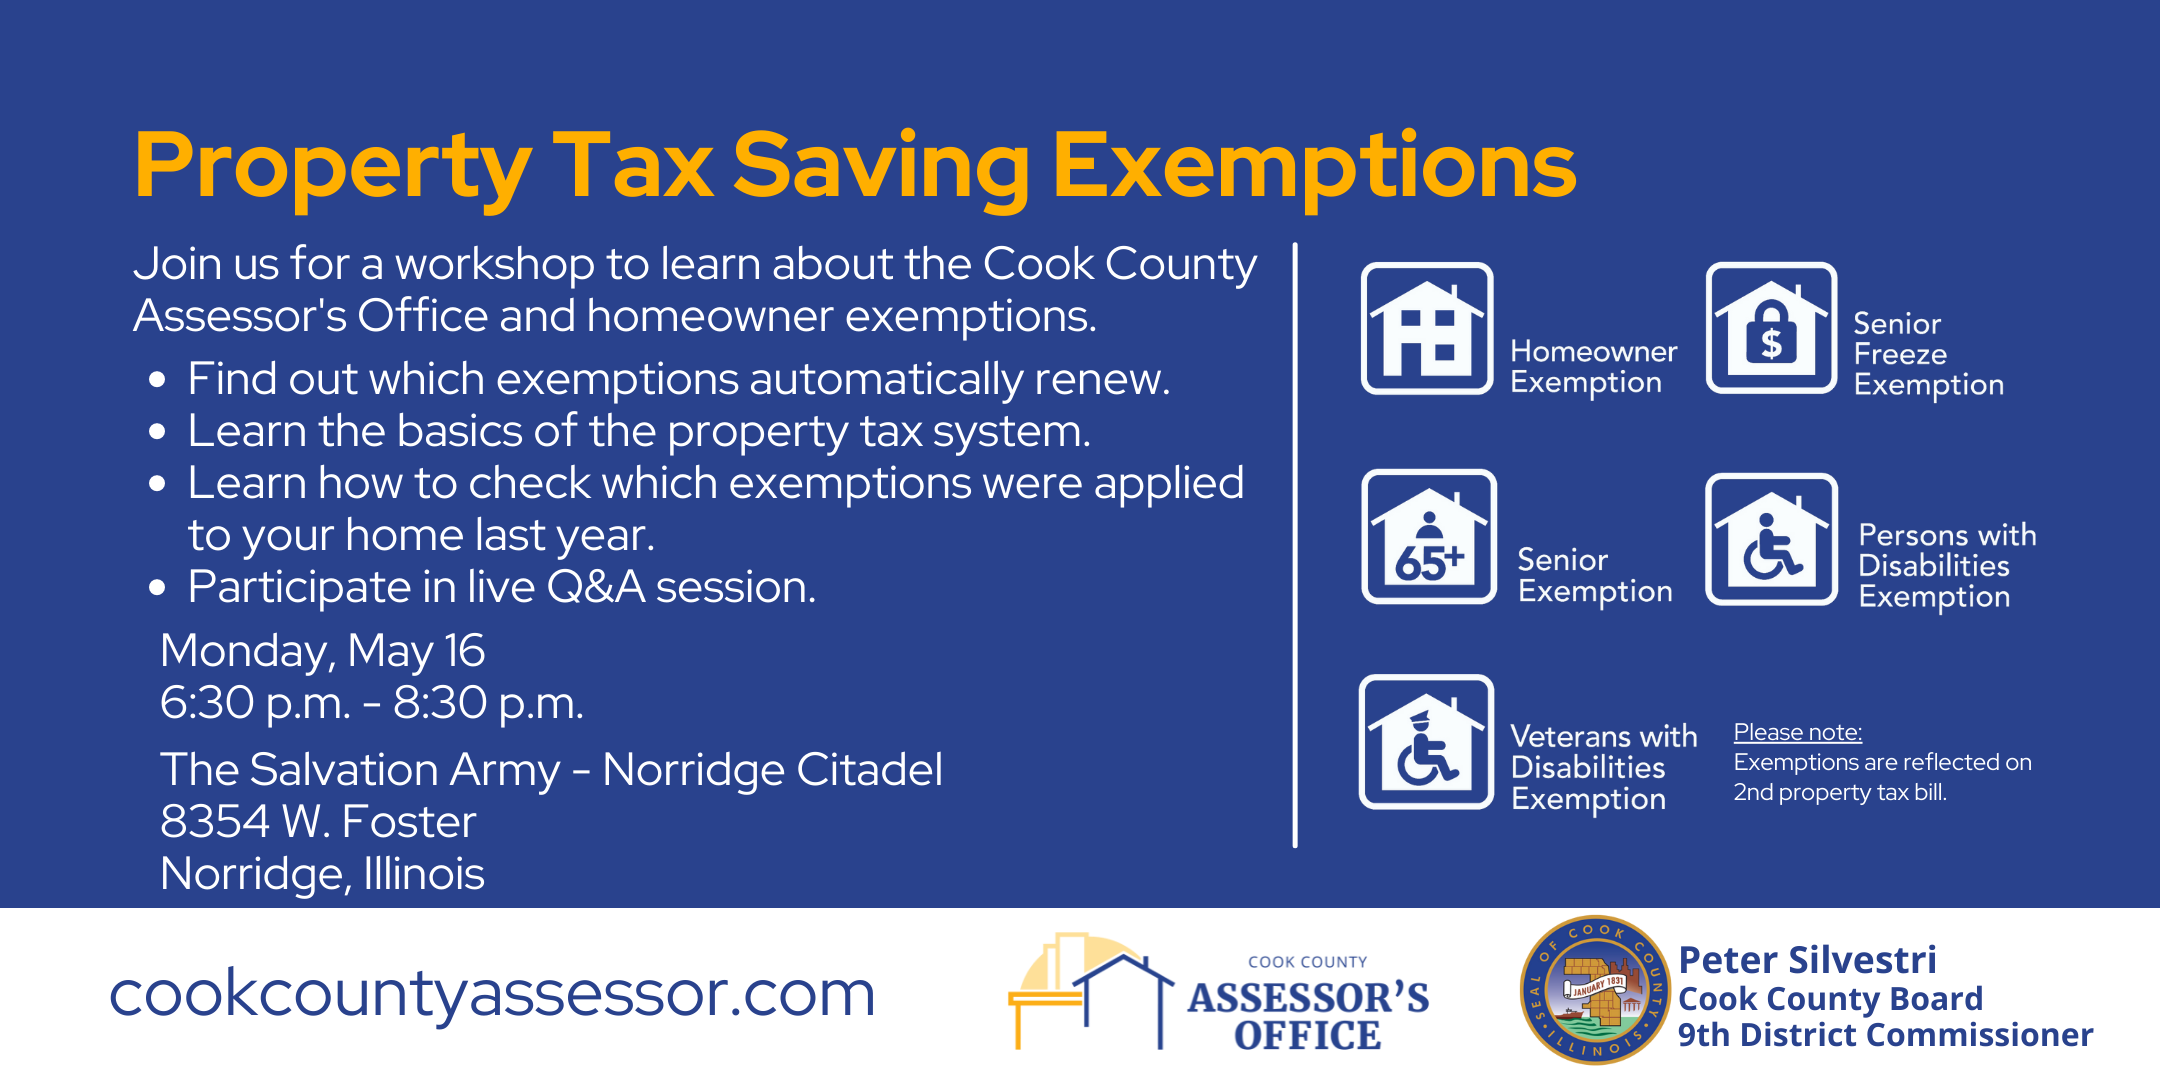 Property Tax Exemption Workshop with Commissioner Peter Silvestri May 16, 2022 in Norridge Illinois